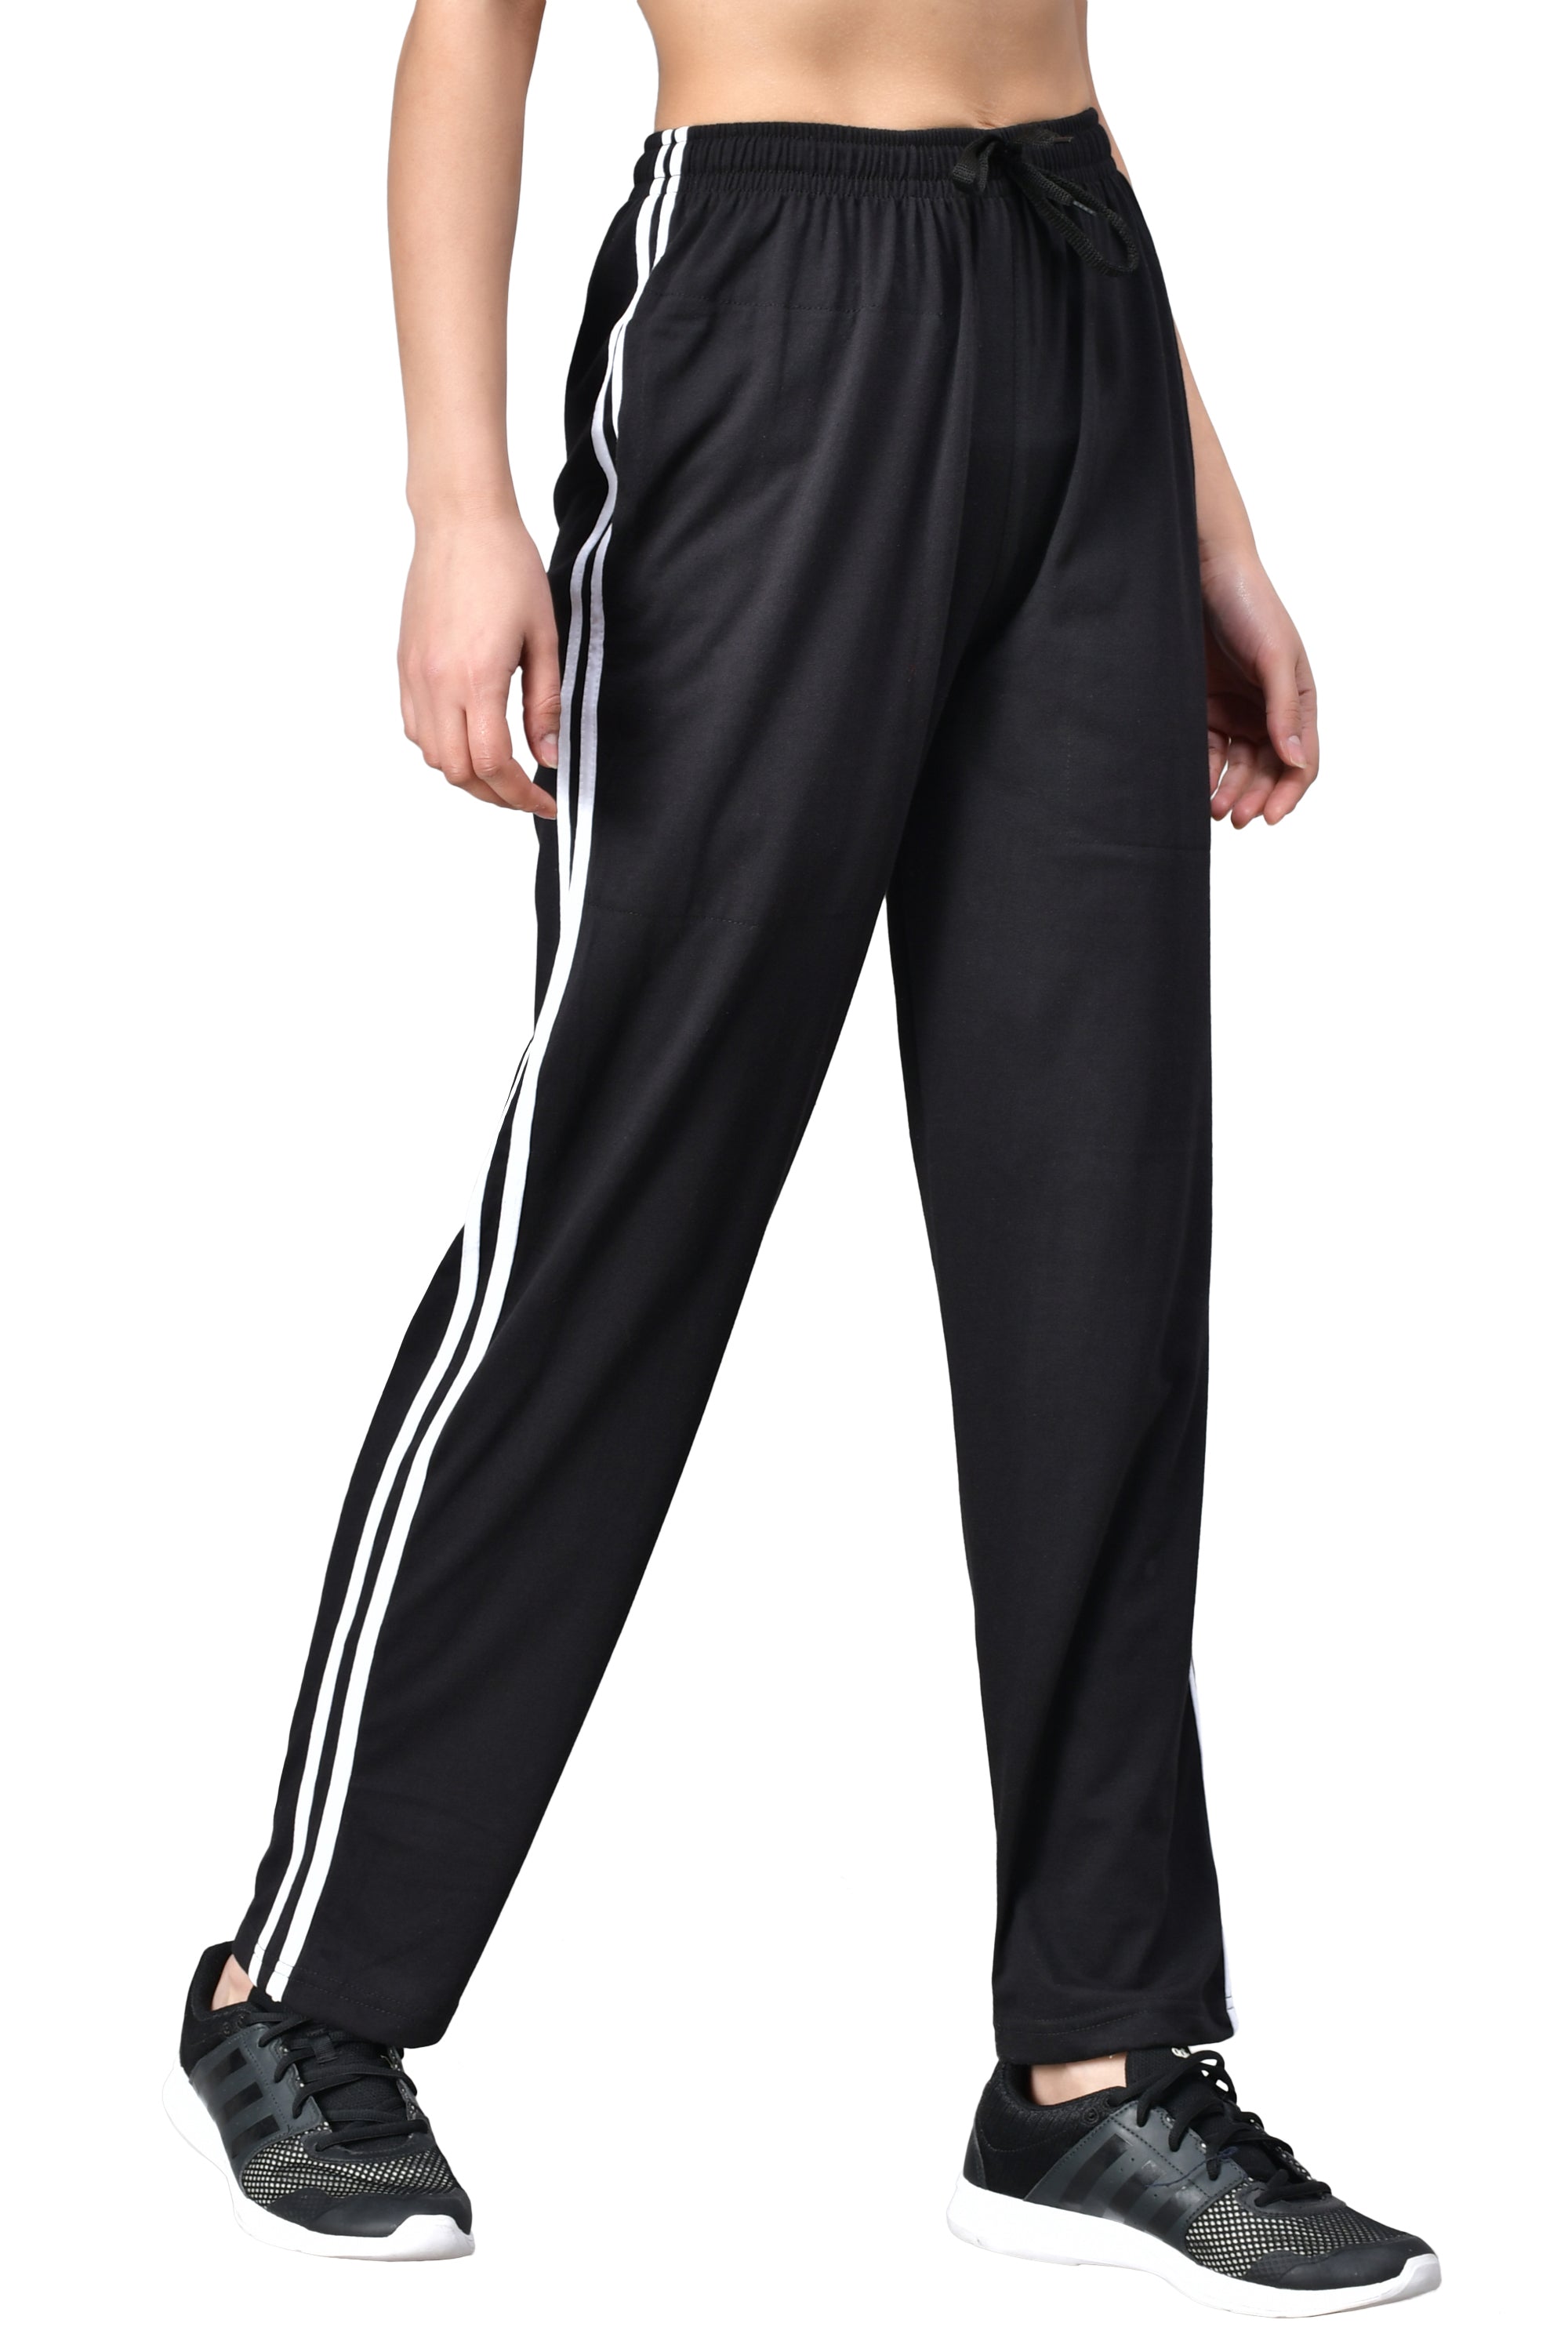 Lower Men Black Track Pant, Age: 20-28, Size: Medium at Rs 200/piece in  Tiruppur